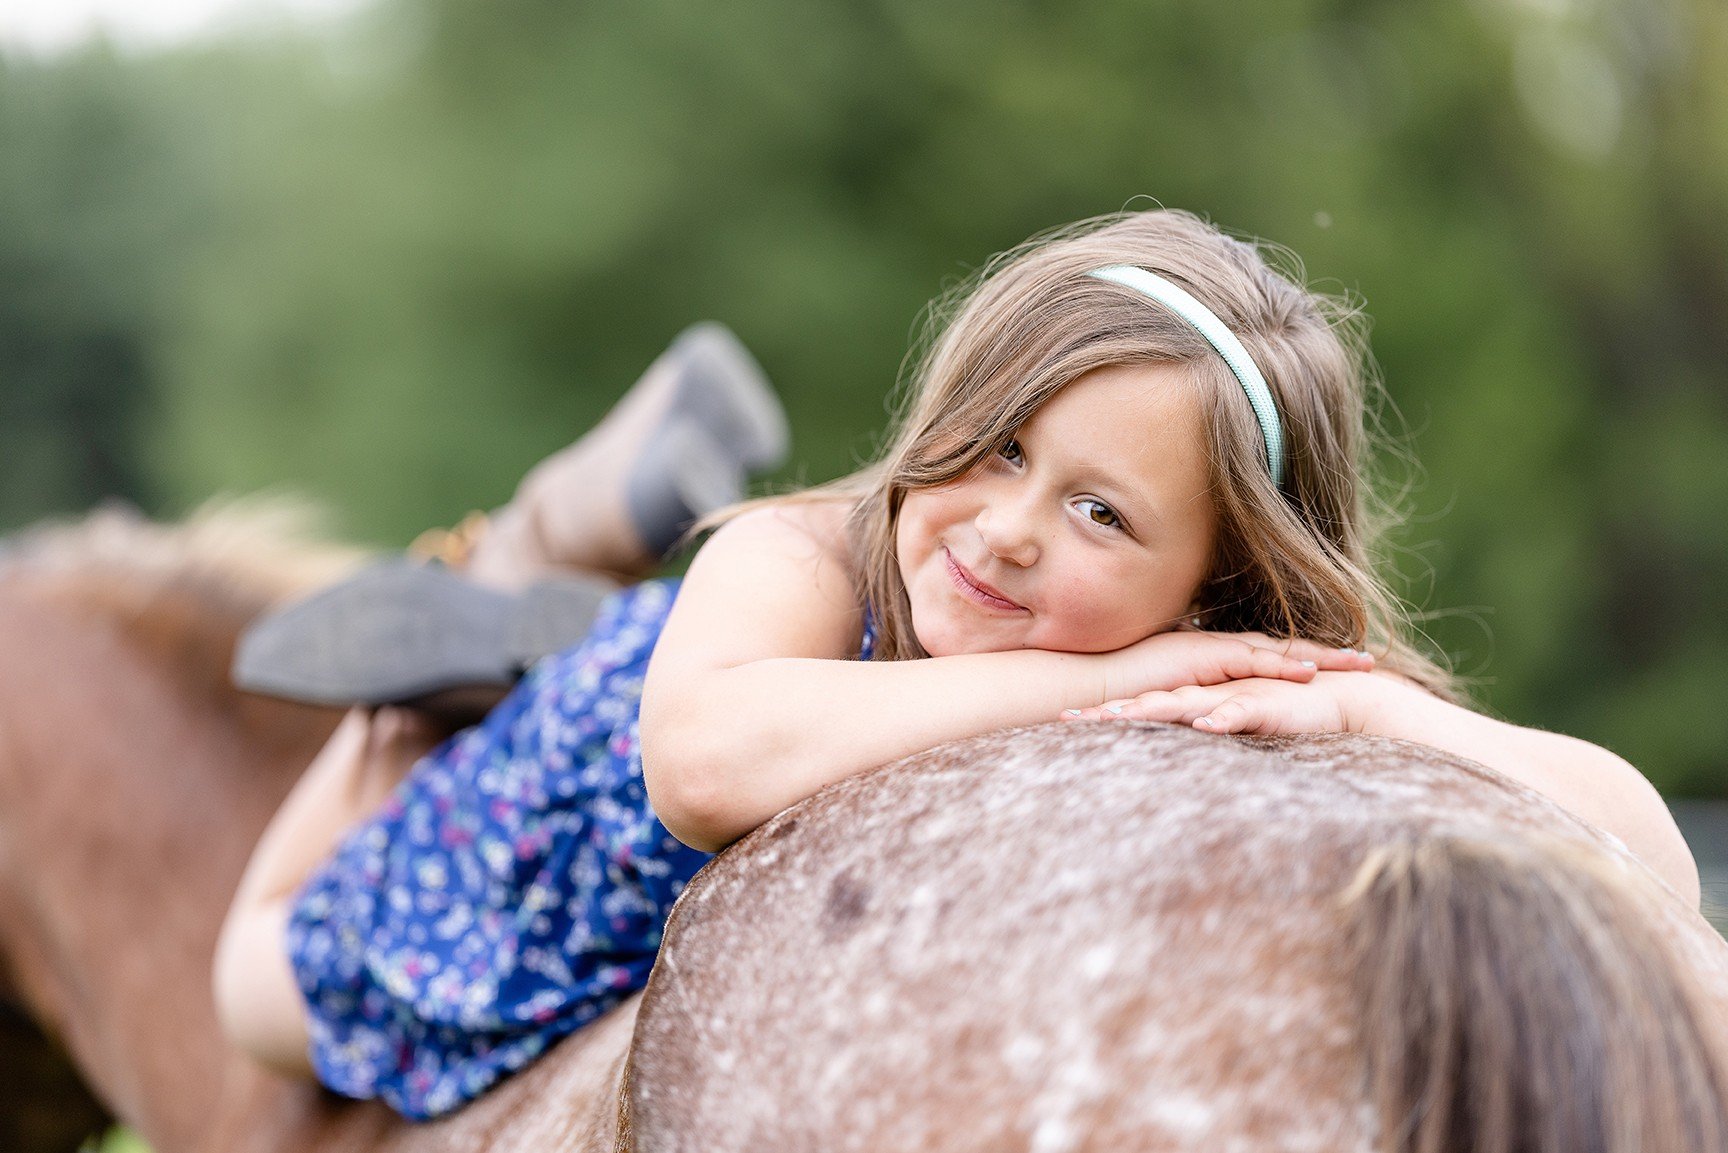 Youth horse and rider photoshoot in Marshfield, WI